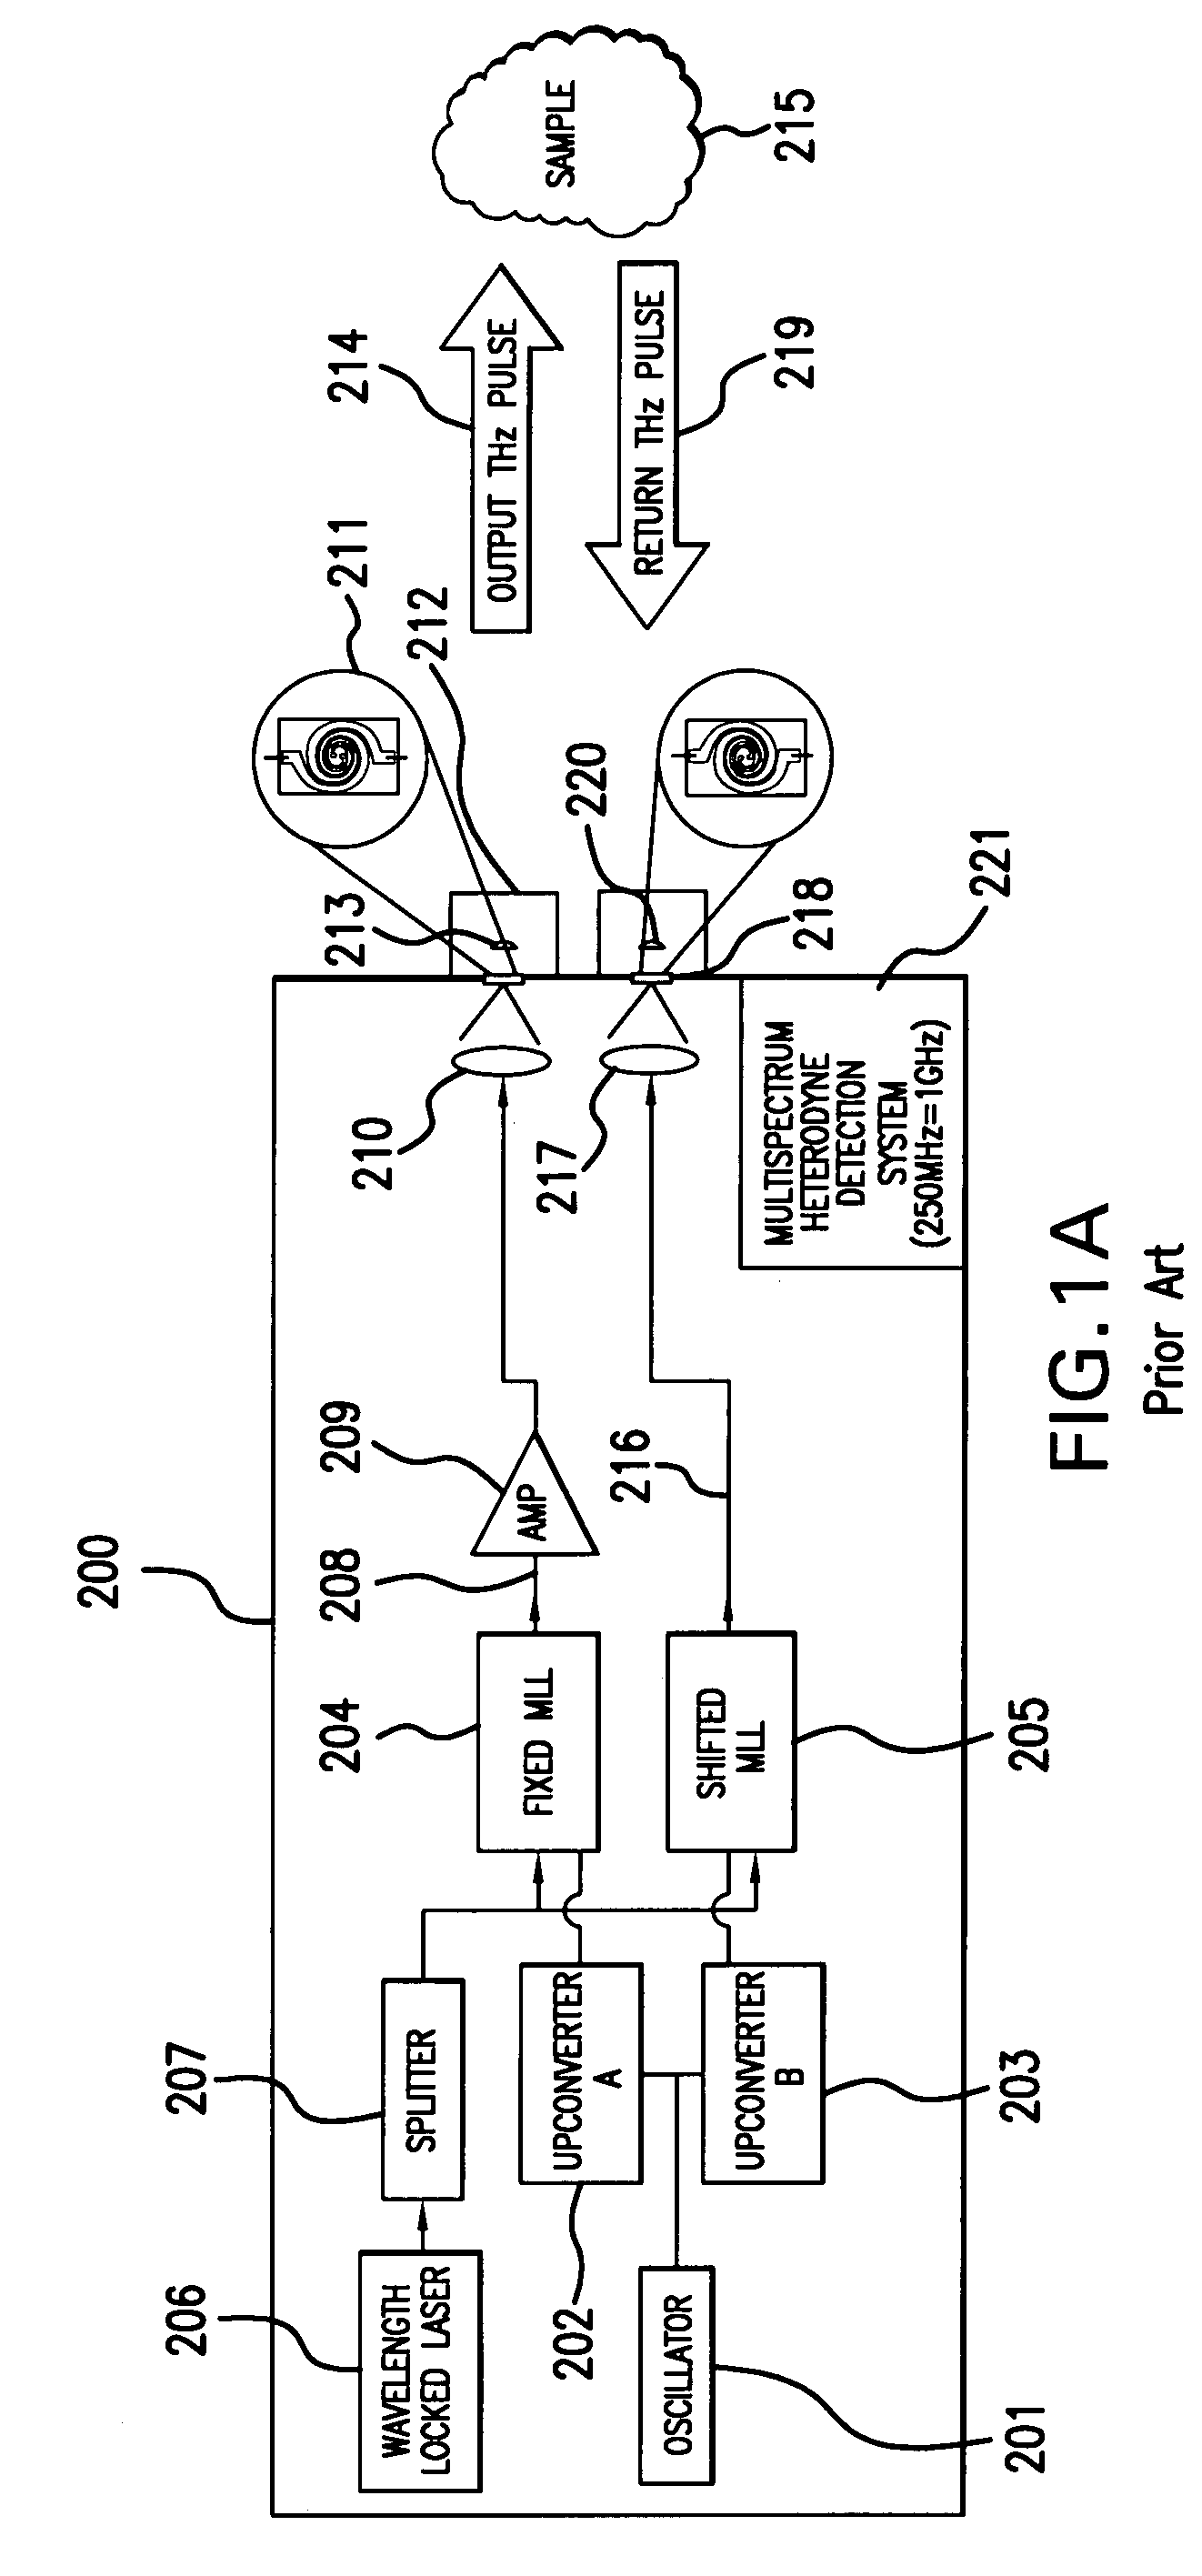 Pulsed terahertz frequency domain spectrometer with single mode-locked laser and dispersive phase modulator